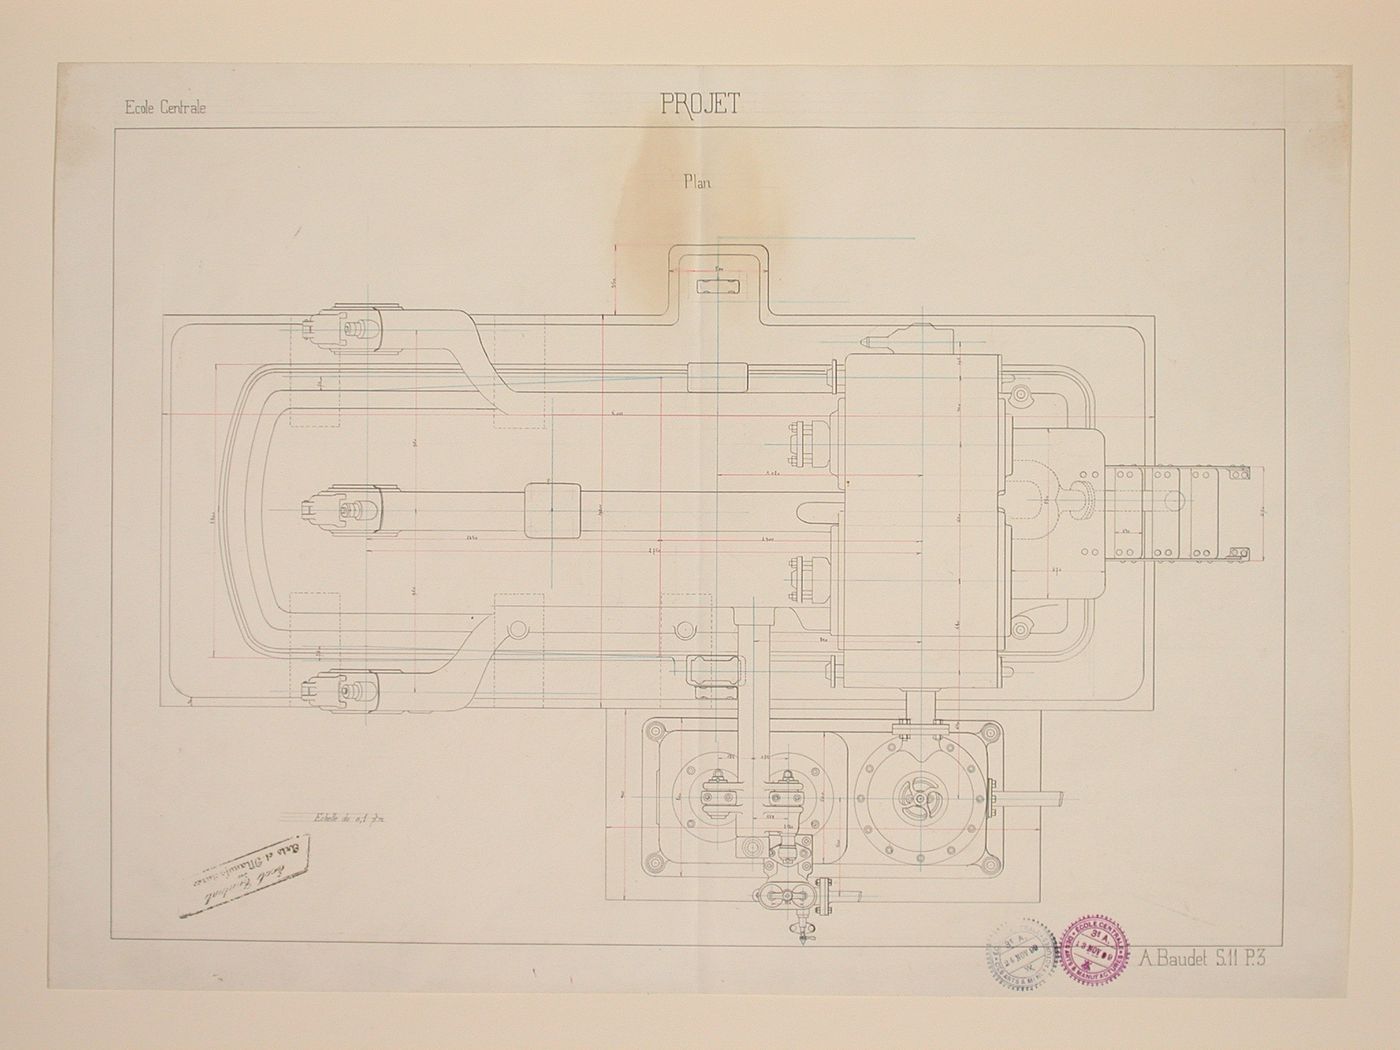 Student engineering drawing: Plan of a machine